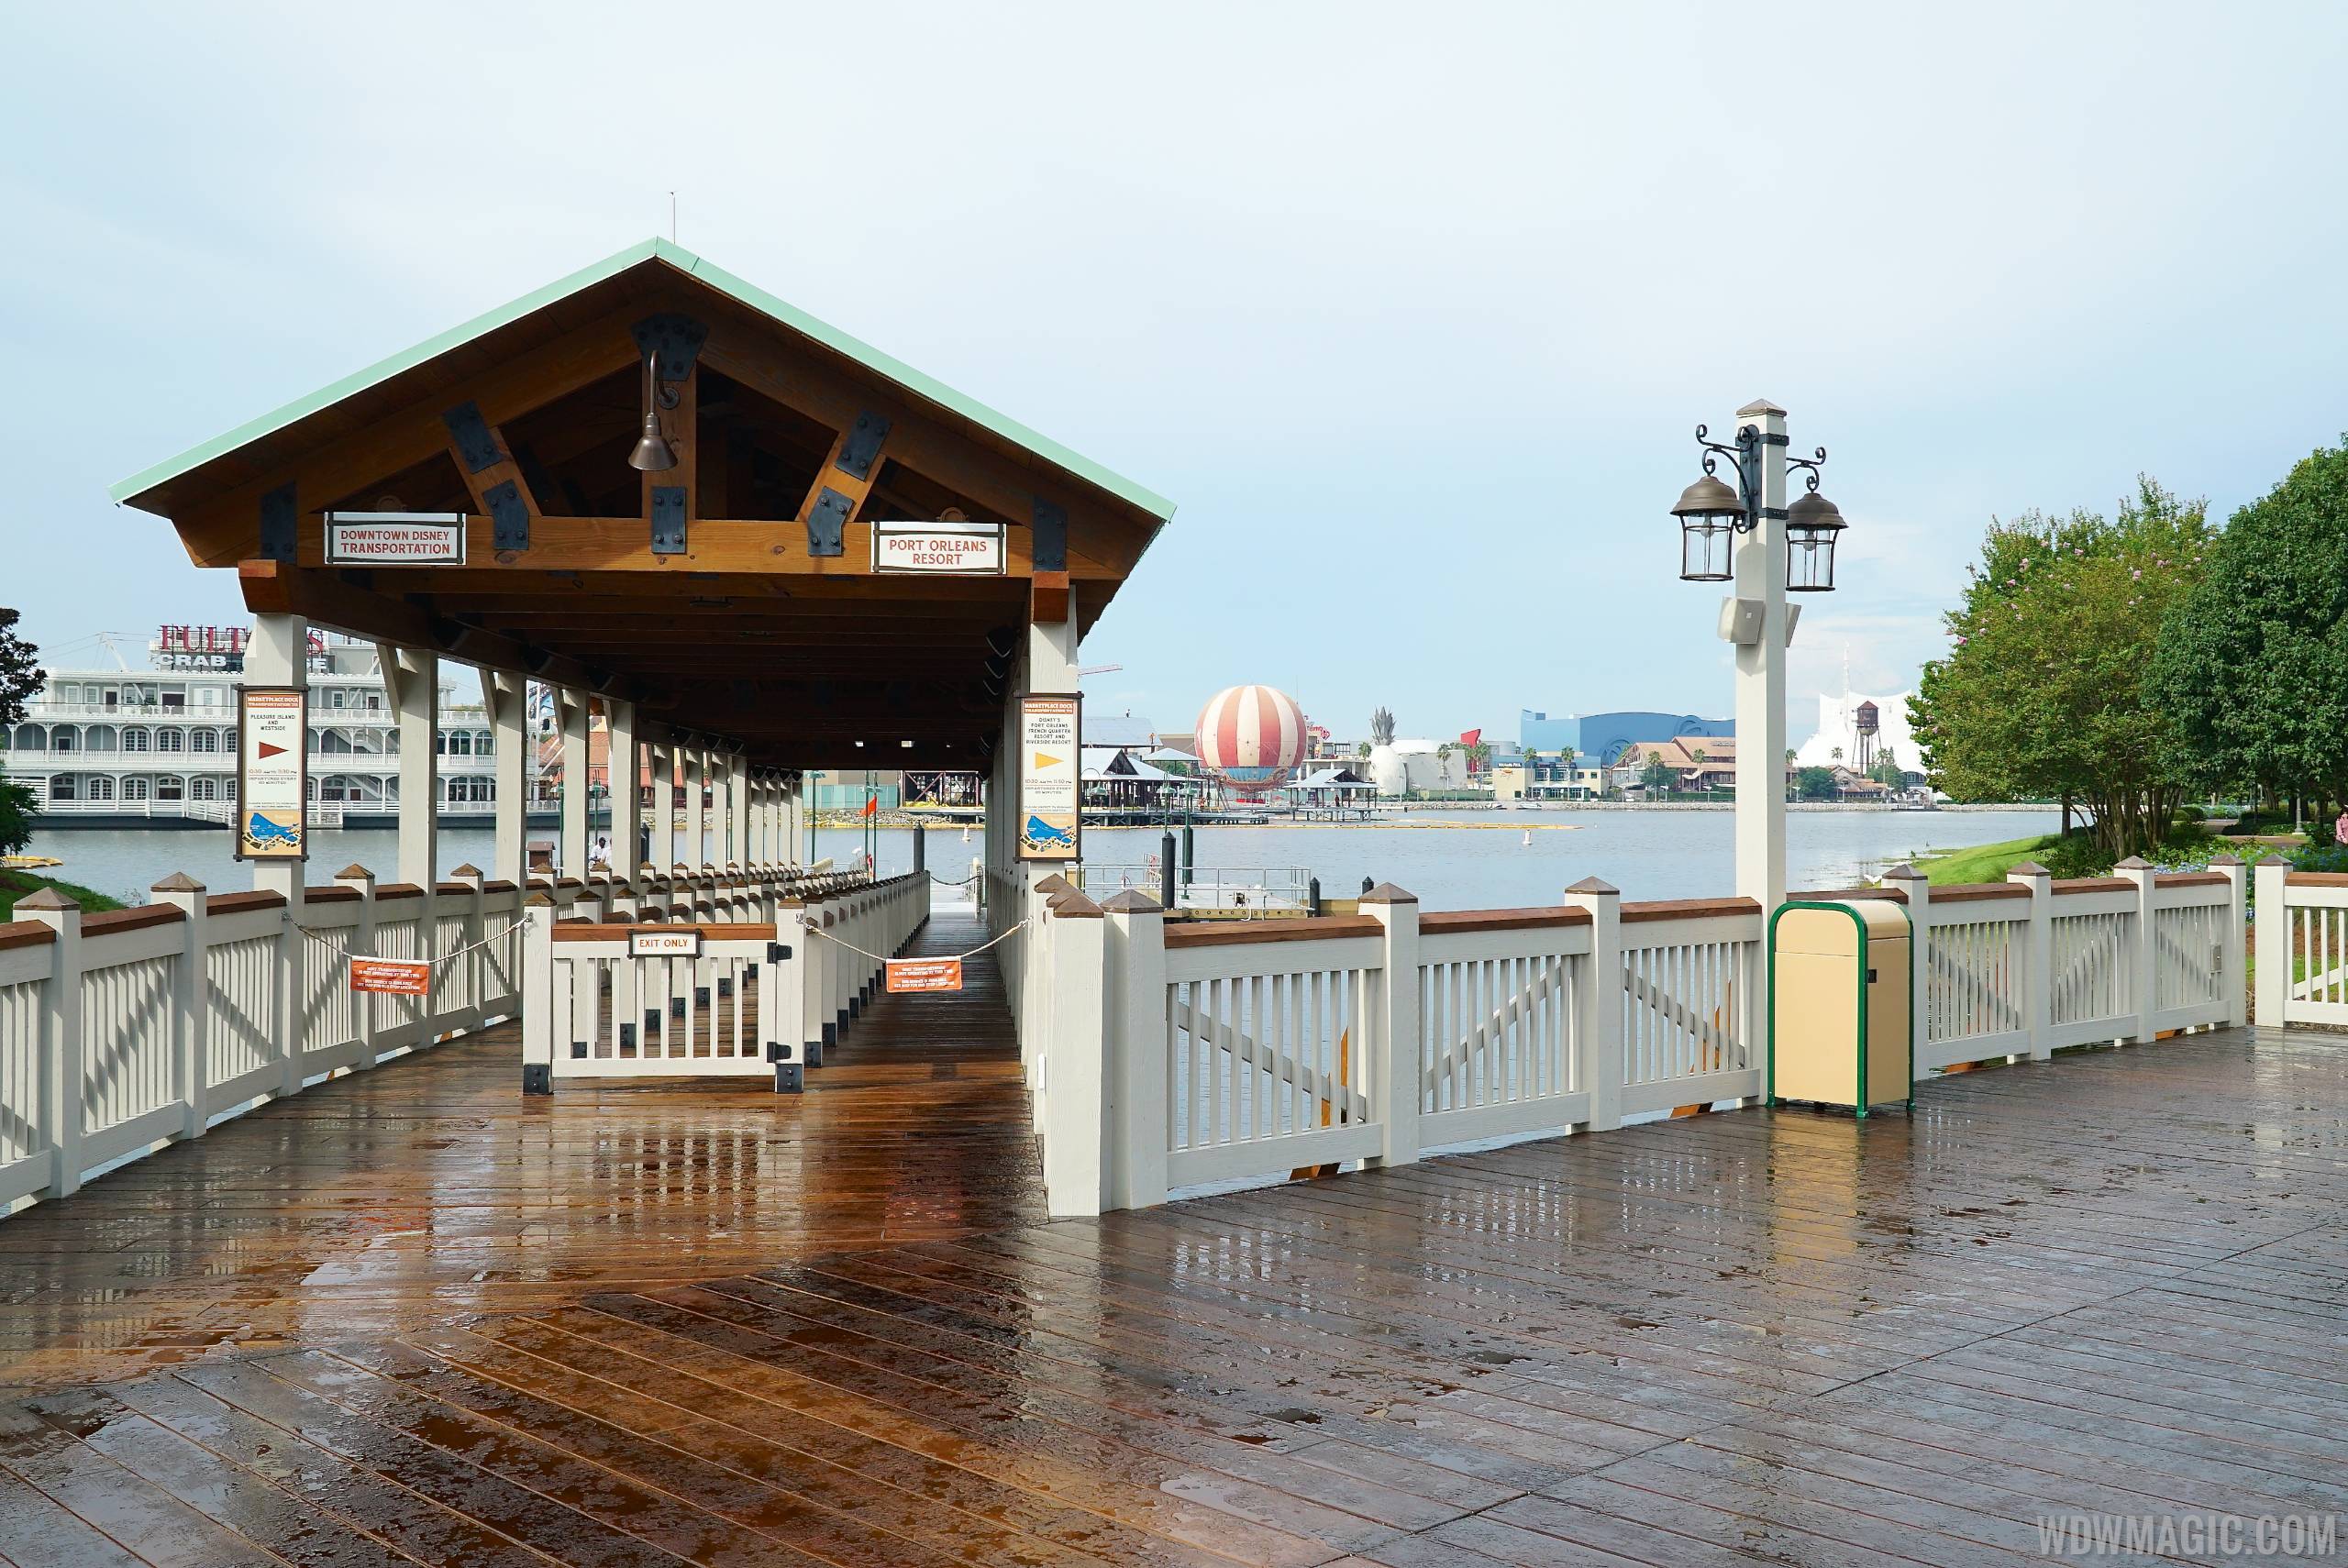 The Marketplace boat dock